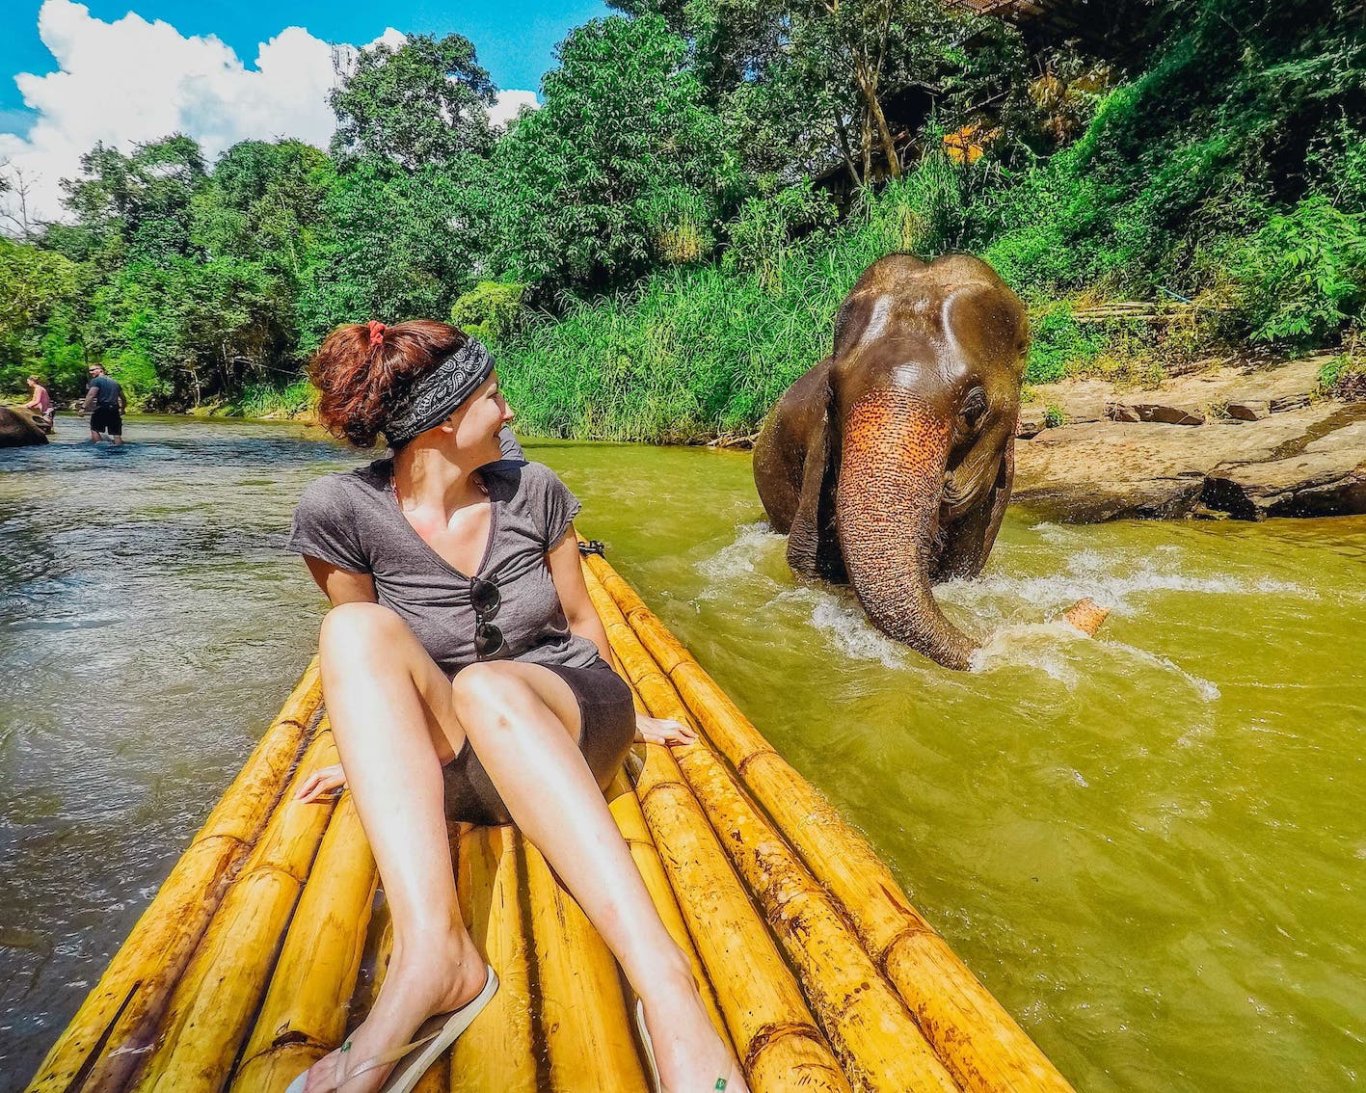 Elephant in river - Northern Thailand